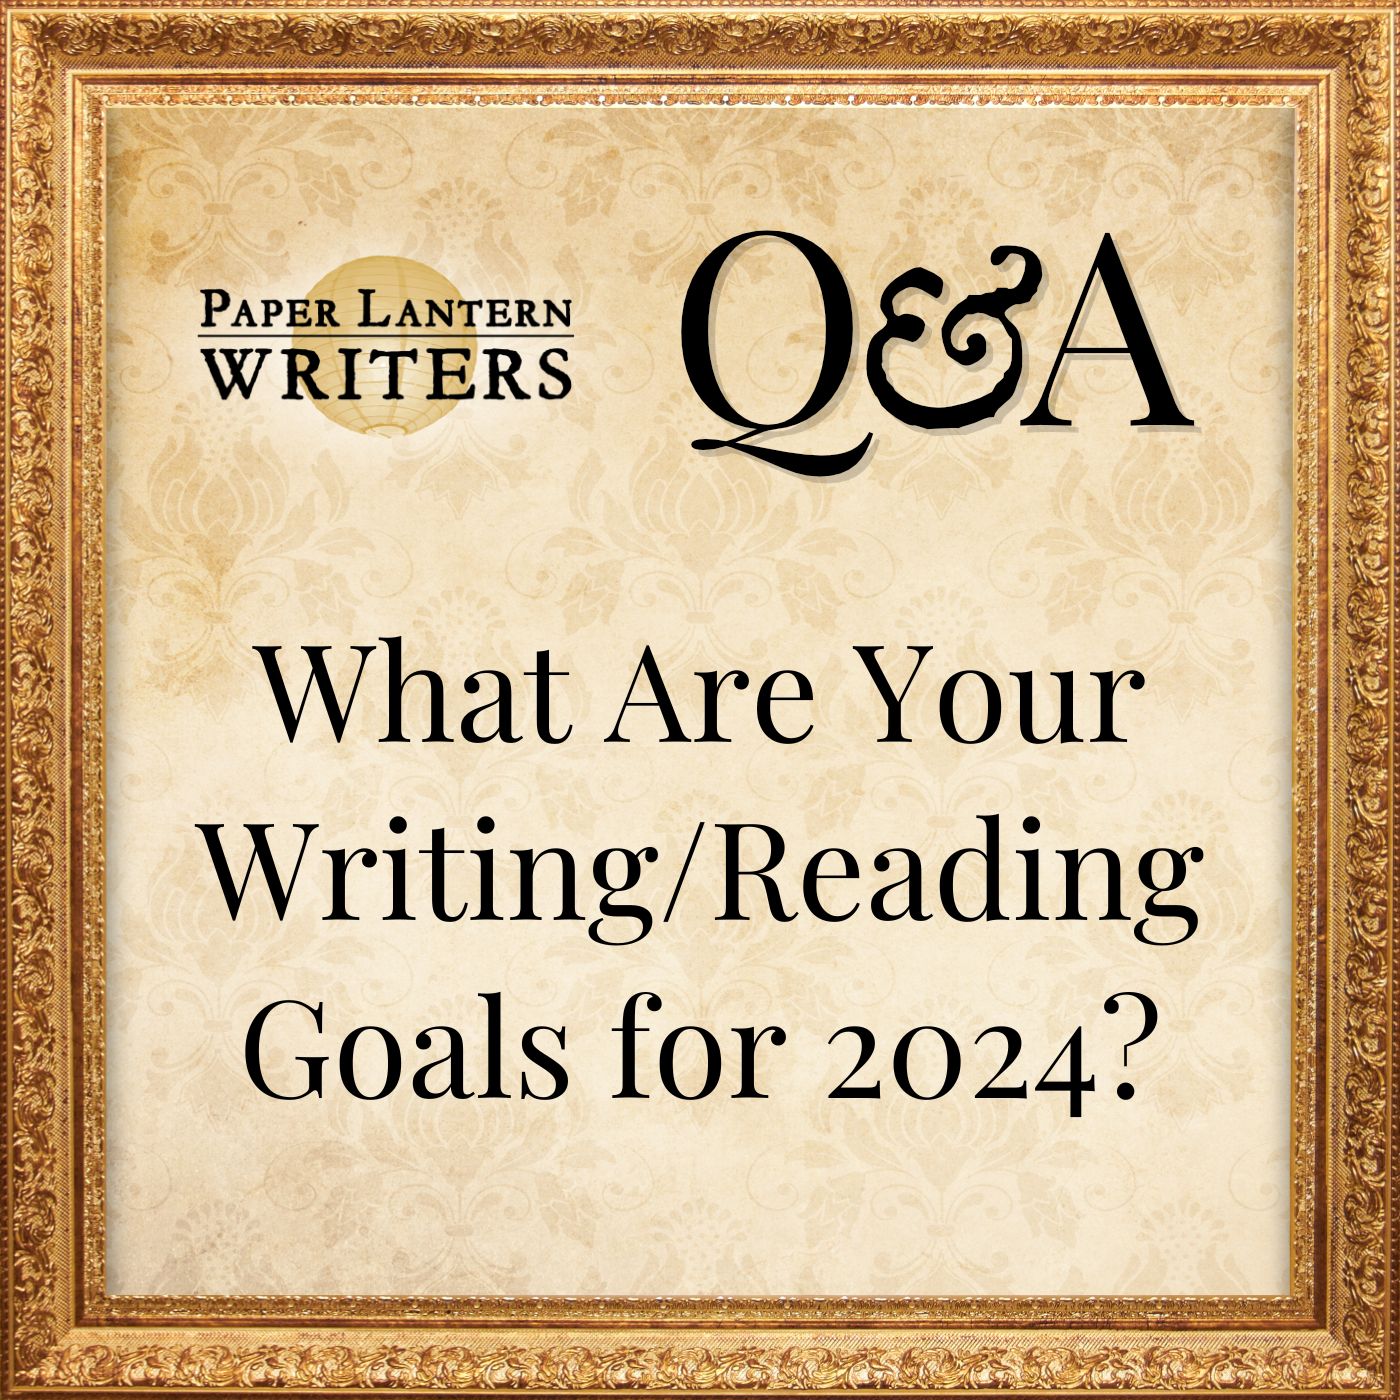 Q&A: What Are Your Writing/Reading Goals for 2024?